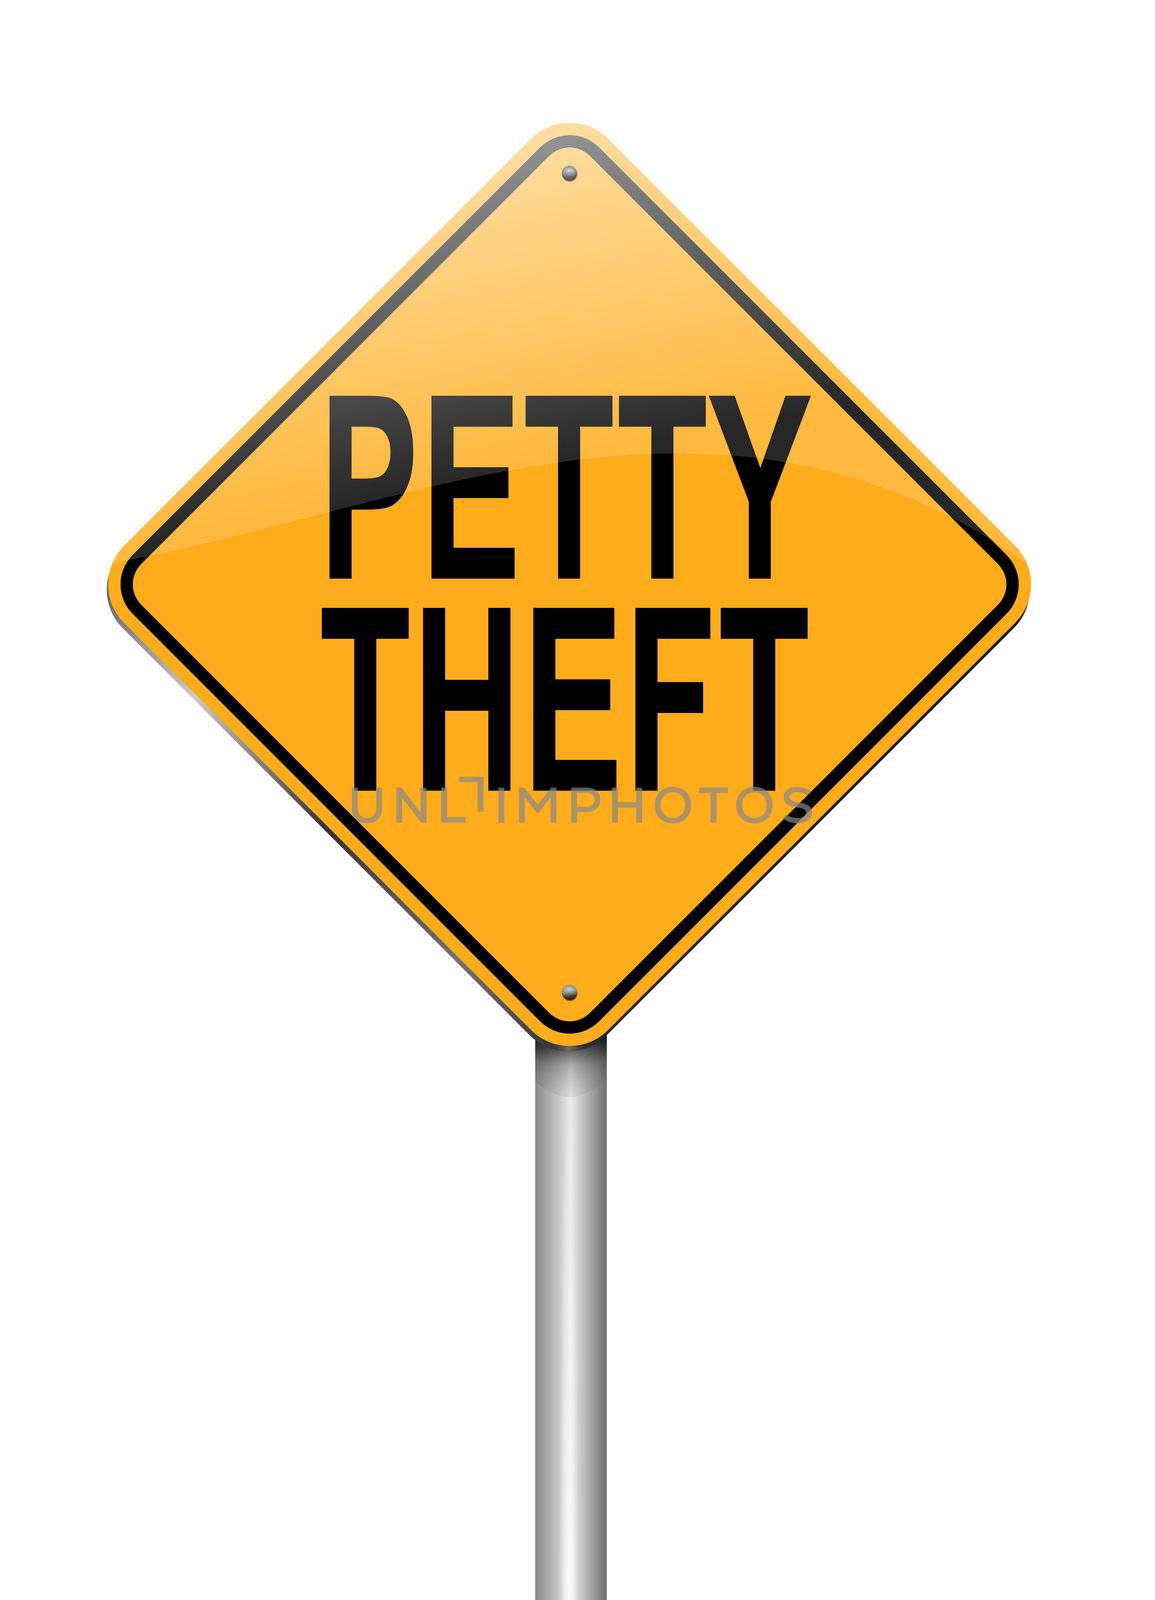 Petty theft concept. by 72soul